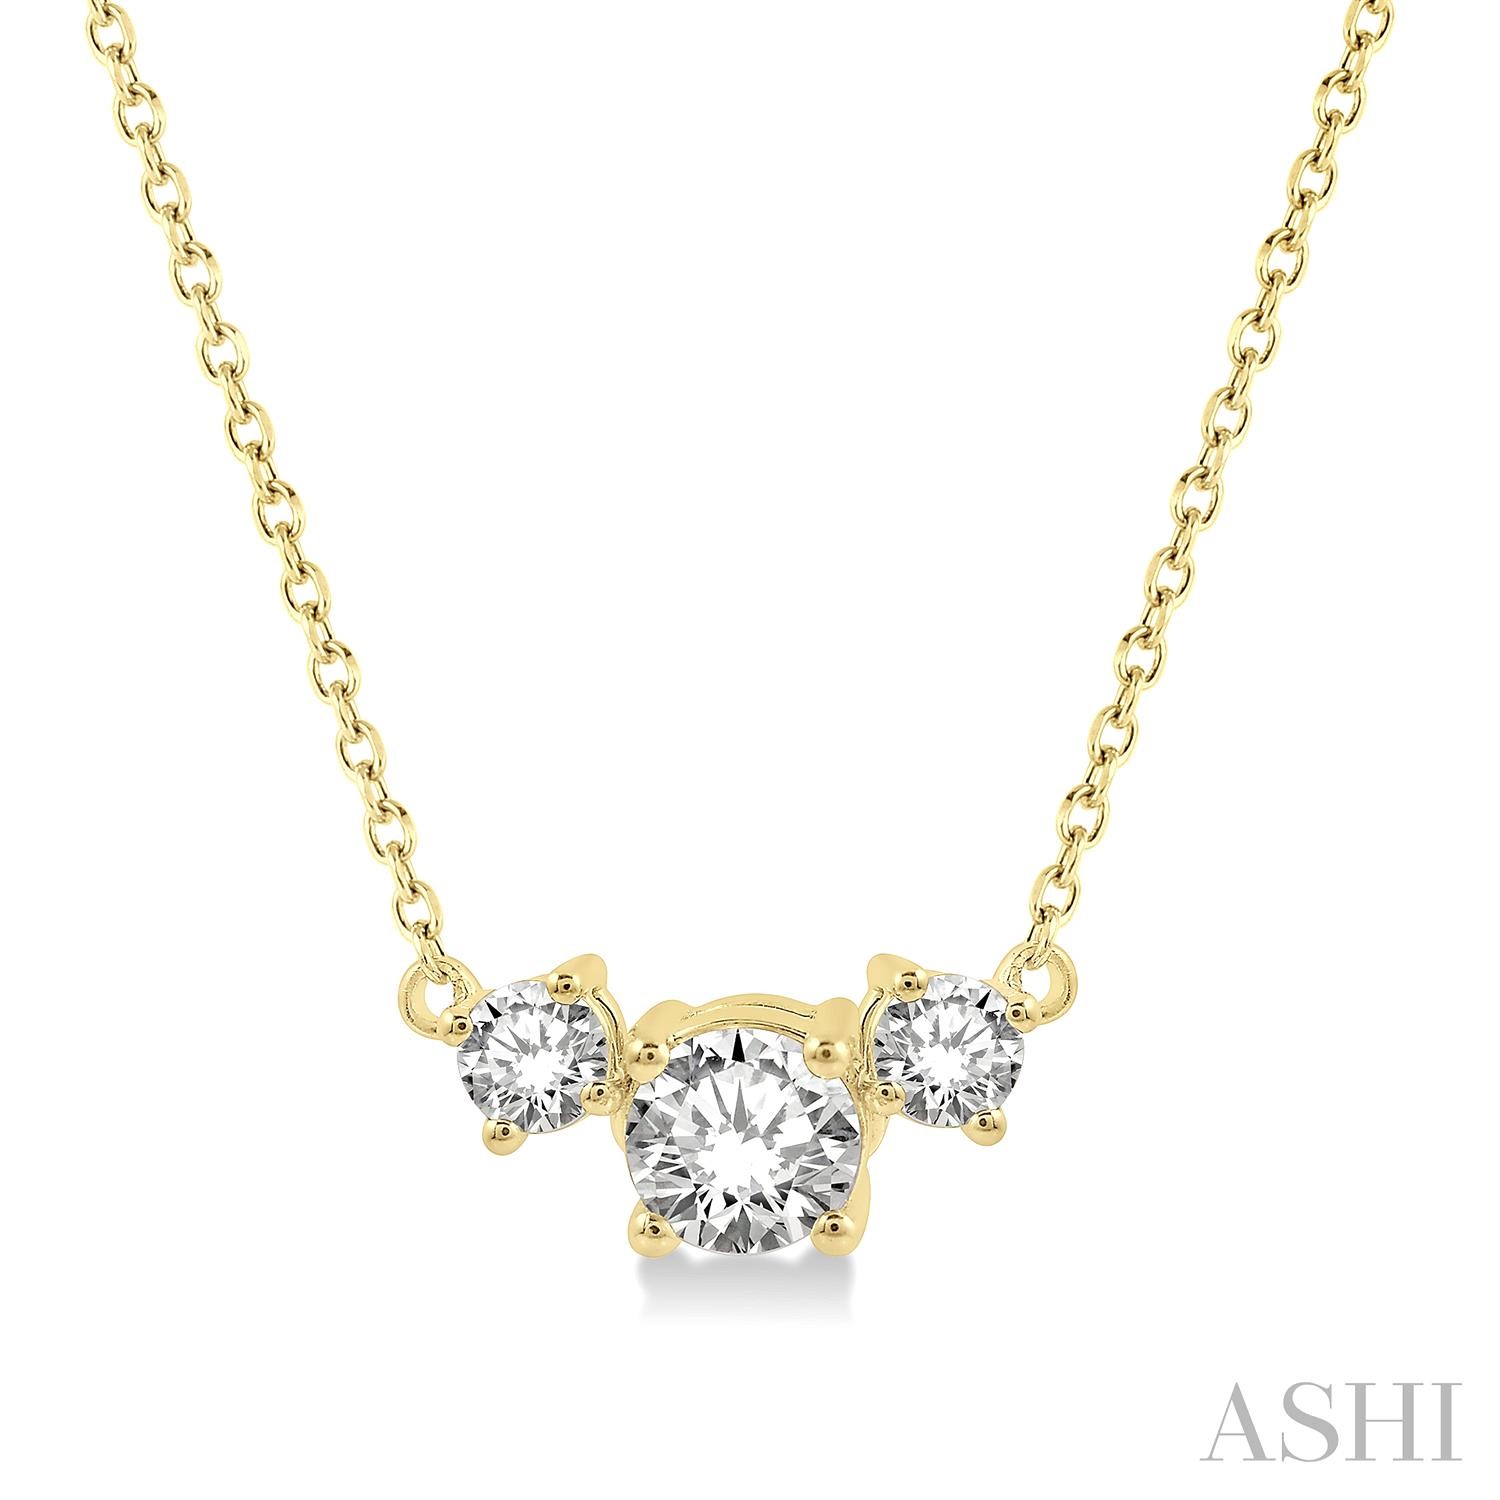 14K YELLOW GOLD 3-STONE DIAMOND NECKLACE WITH ONE 0.32CT ROUND G-H SI1-SI2 DIAMOND AND 2=0.18TW ROUND G-H SI1-SI2 DIAMONDS 18